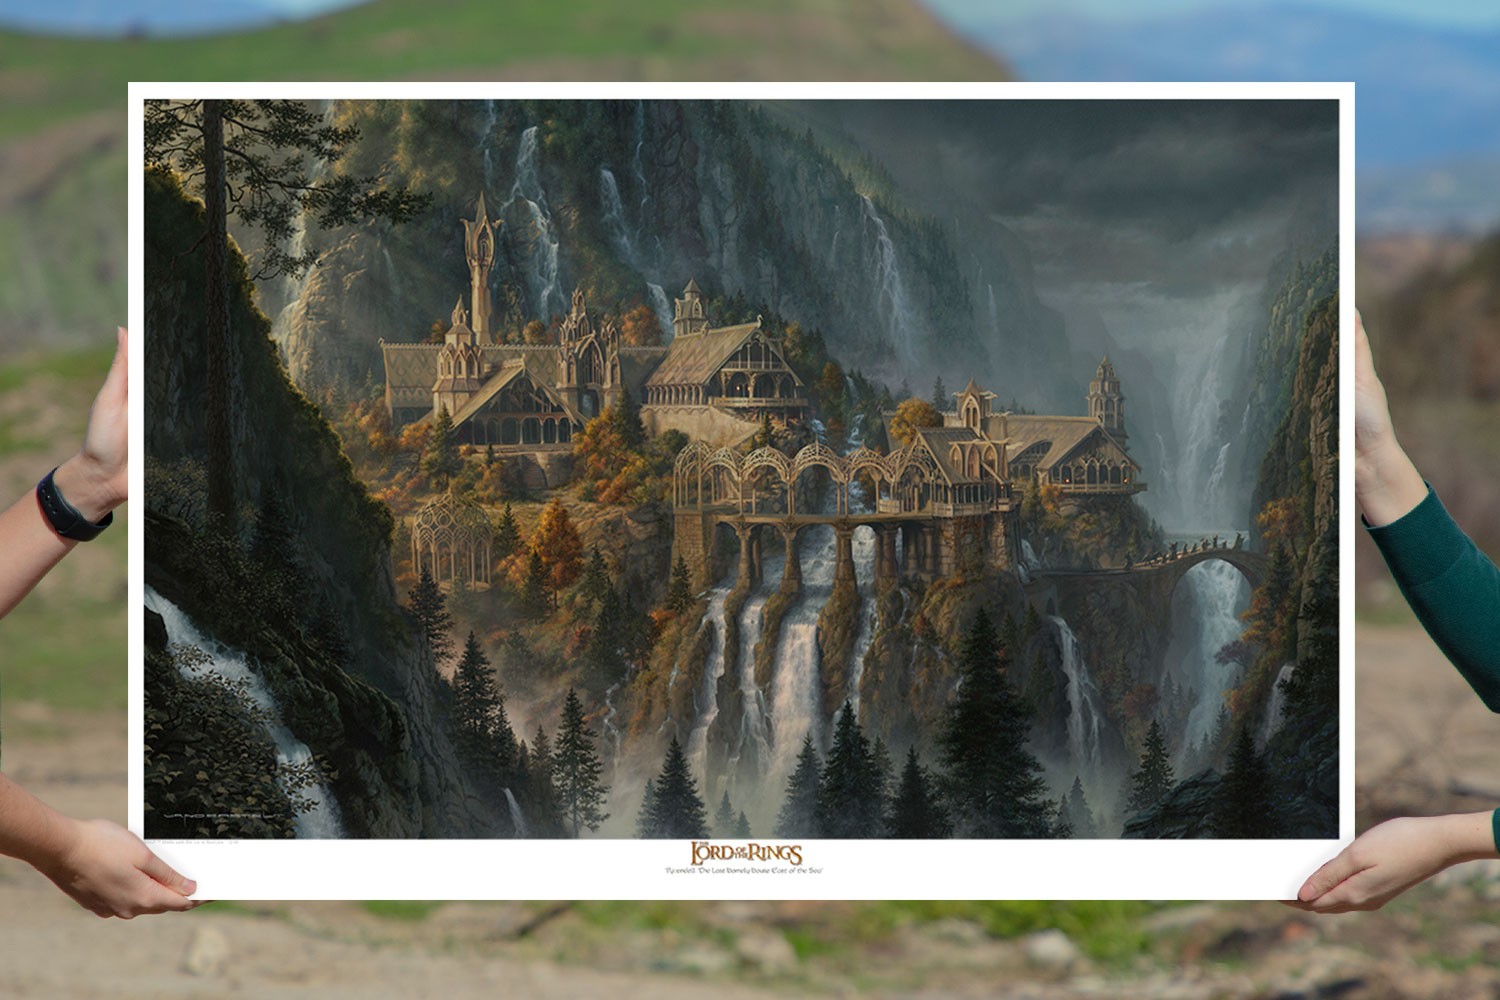 Rivendell: The Last Homely House East of the Sea